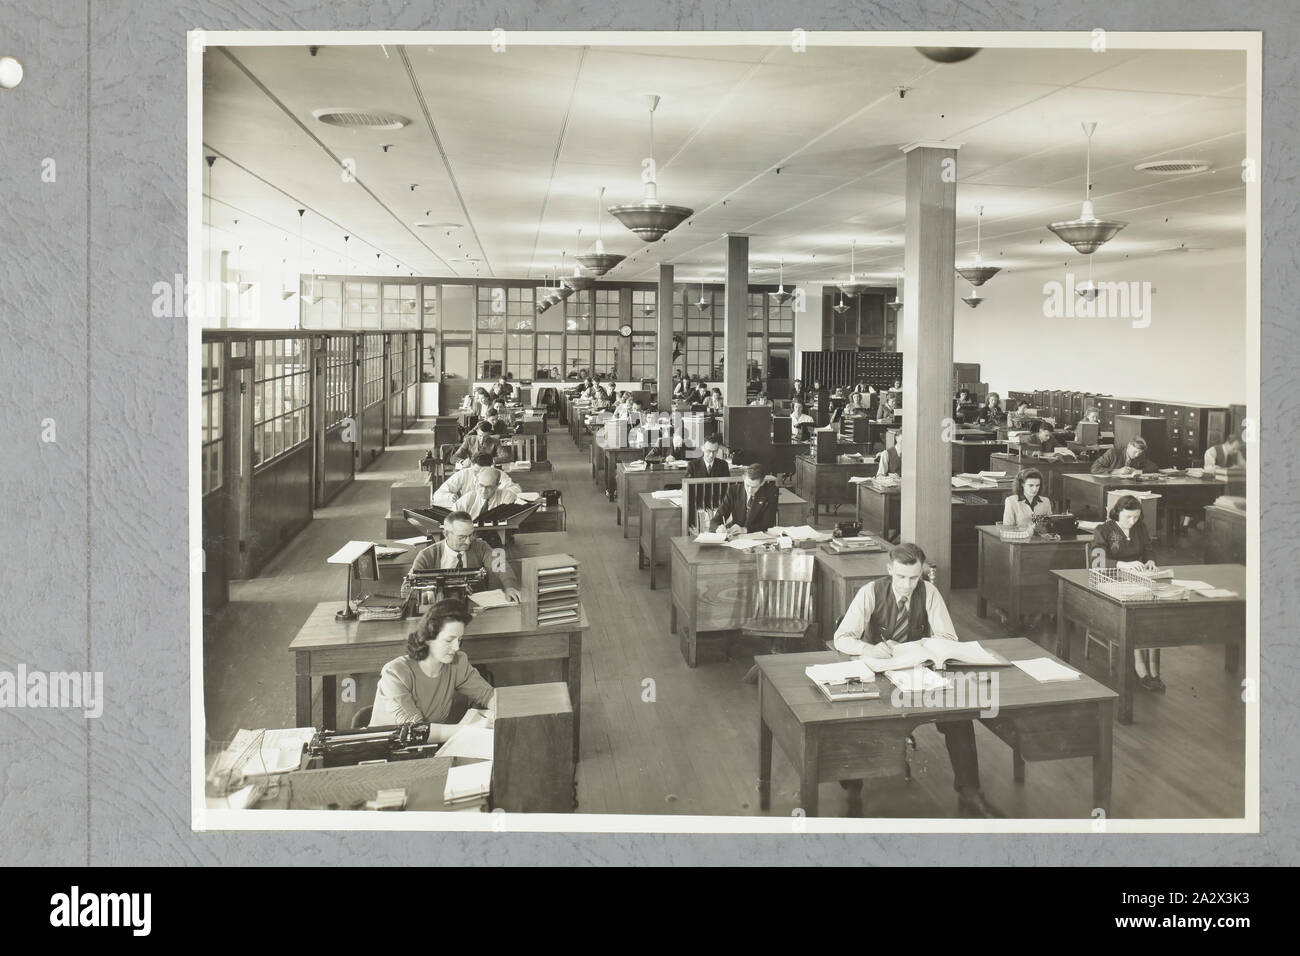 Photograph - International Harvester, Office Interior, Harvester House, Melbourne, 11 Dec 1946, One of four black and white photographs attached to an album page. The page is one of 28 that previously made up a photograph album containing black & white photographs of the International Harvester Company's state branch offices and showrooms throughout Australia. Part of a large collection of glass plate and film negatives, transparencies, photo albums, product catalogues, videos Stock Photo